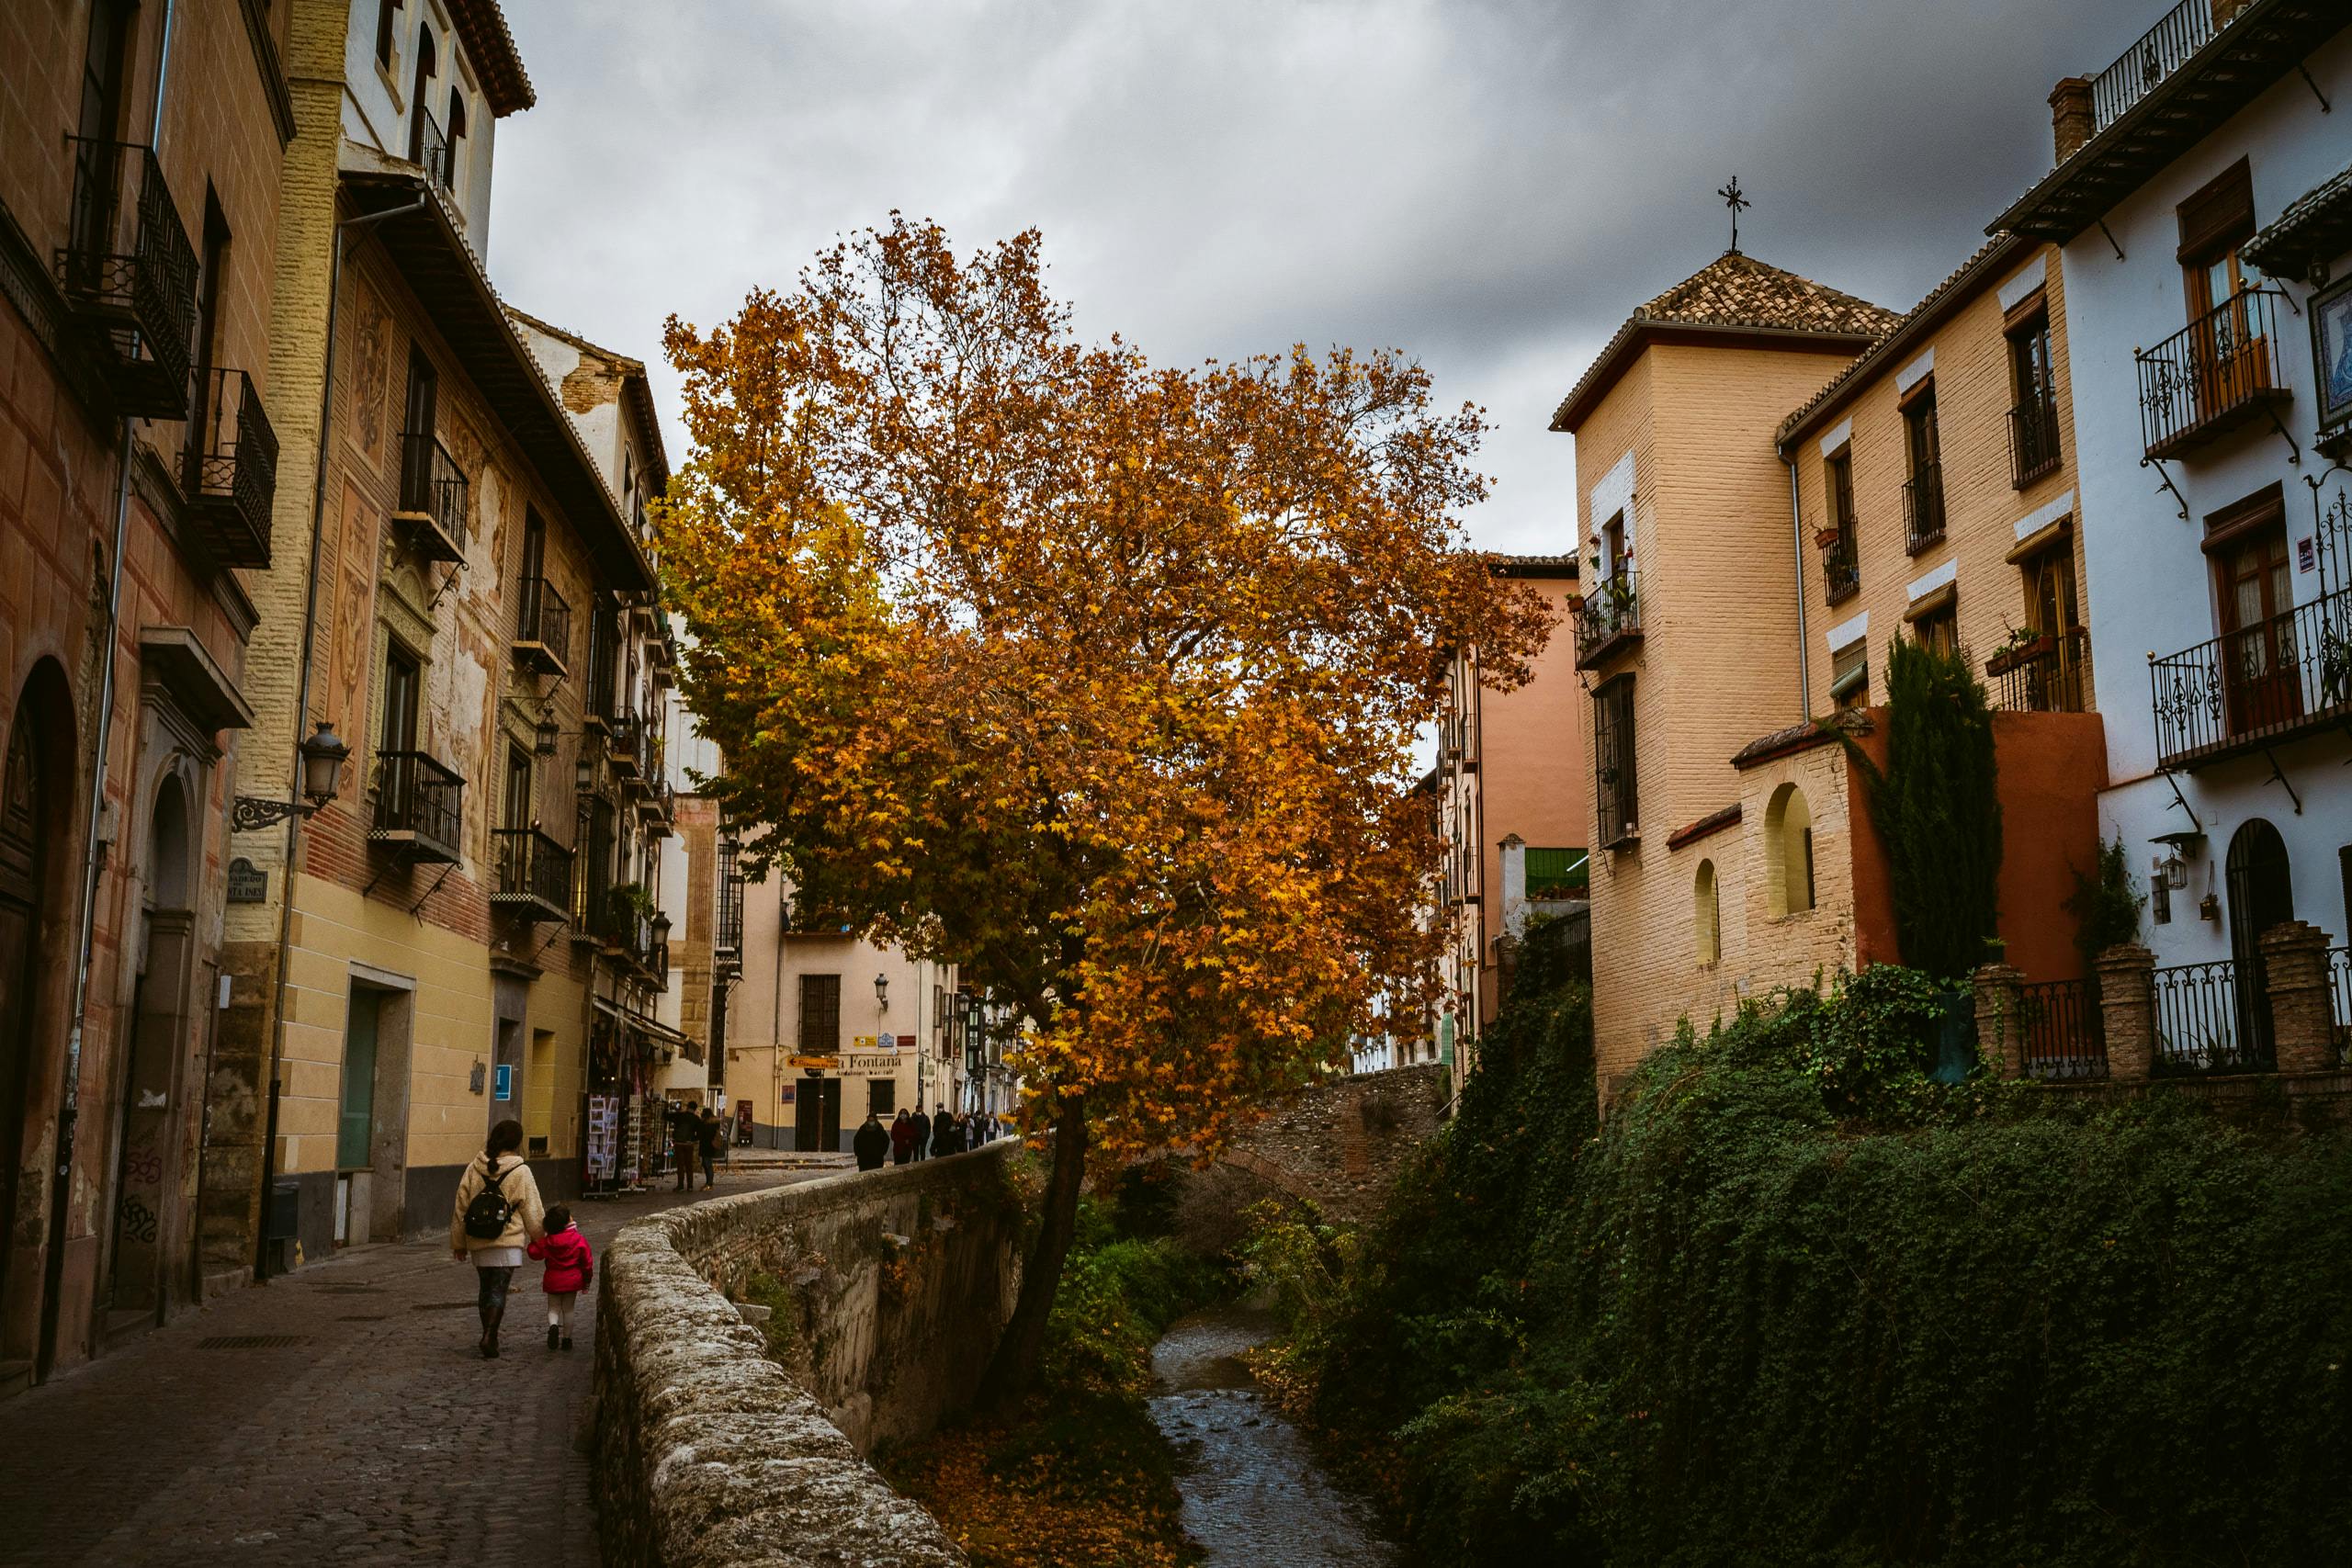 People walking on the street on the left, a tall autumn yellow tree in the center, and building sitting by the creek on the right